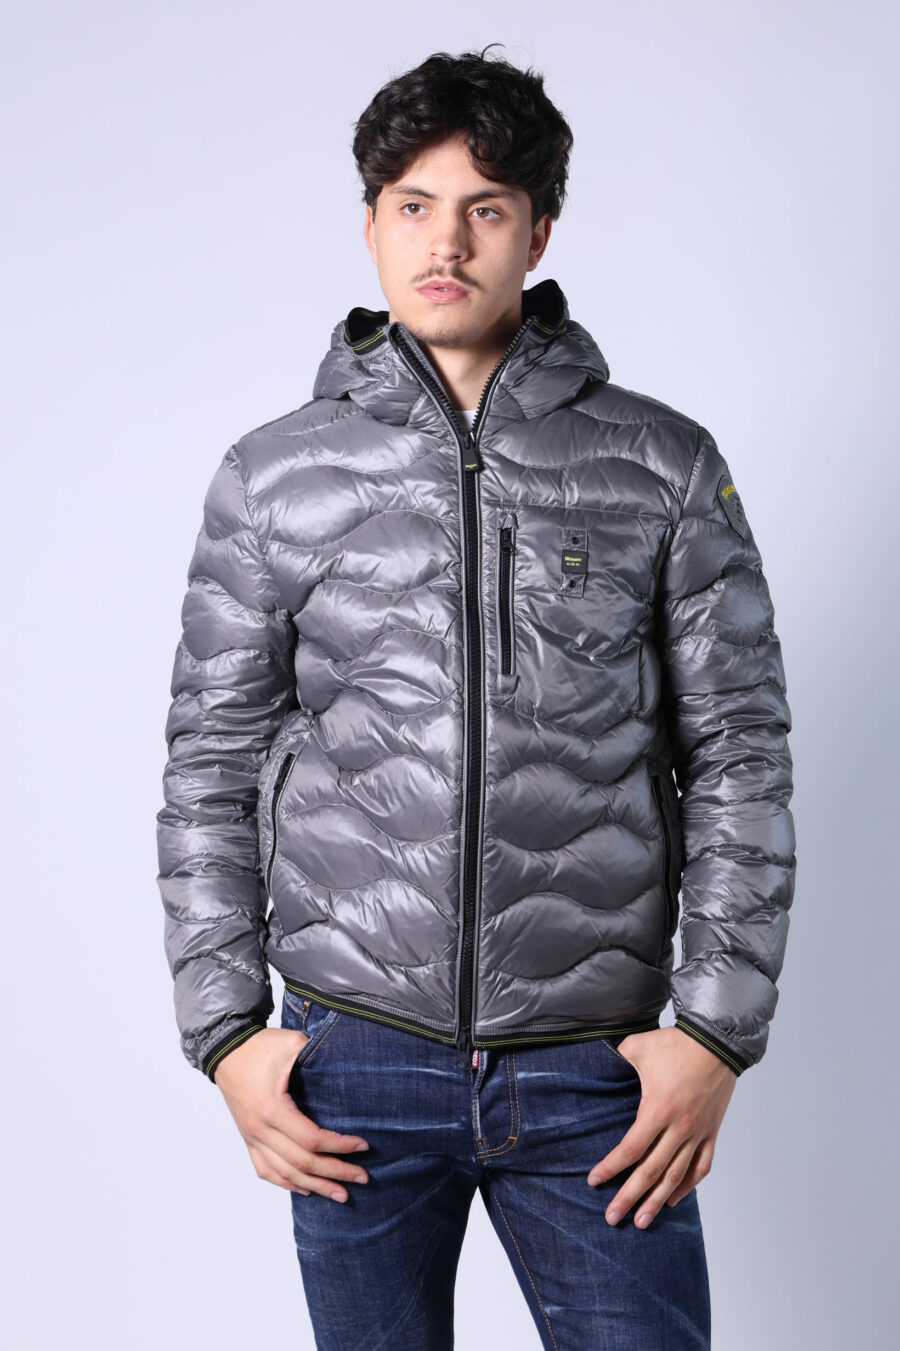 Grey hooded hooded jacket with wavy lines and logo patch - Untitled Catalog 05365